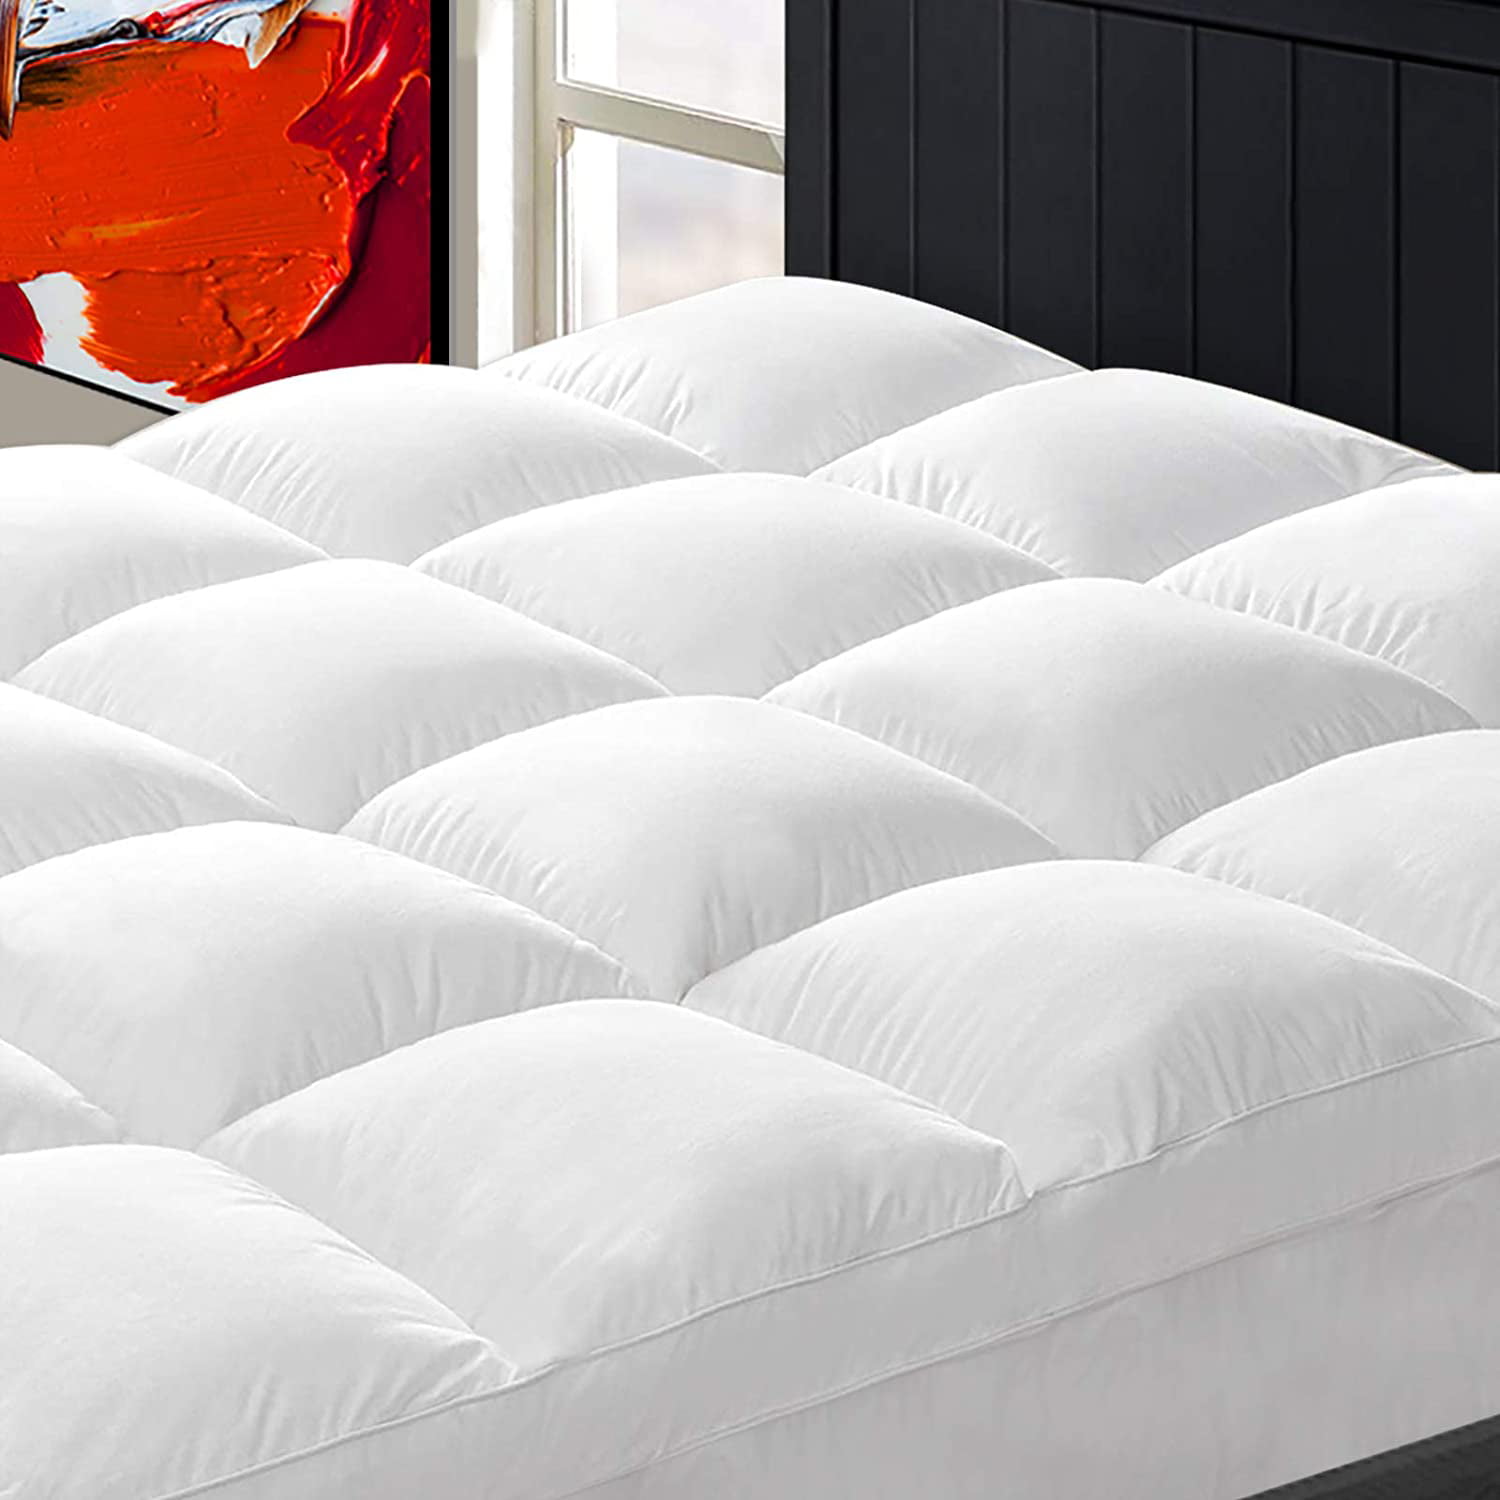 Details about   Extra Thick Mattress Topper King Queen Size Down Alternative PillowTop Cover Pad 